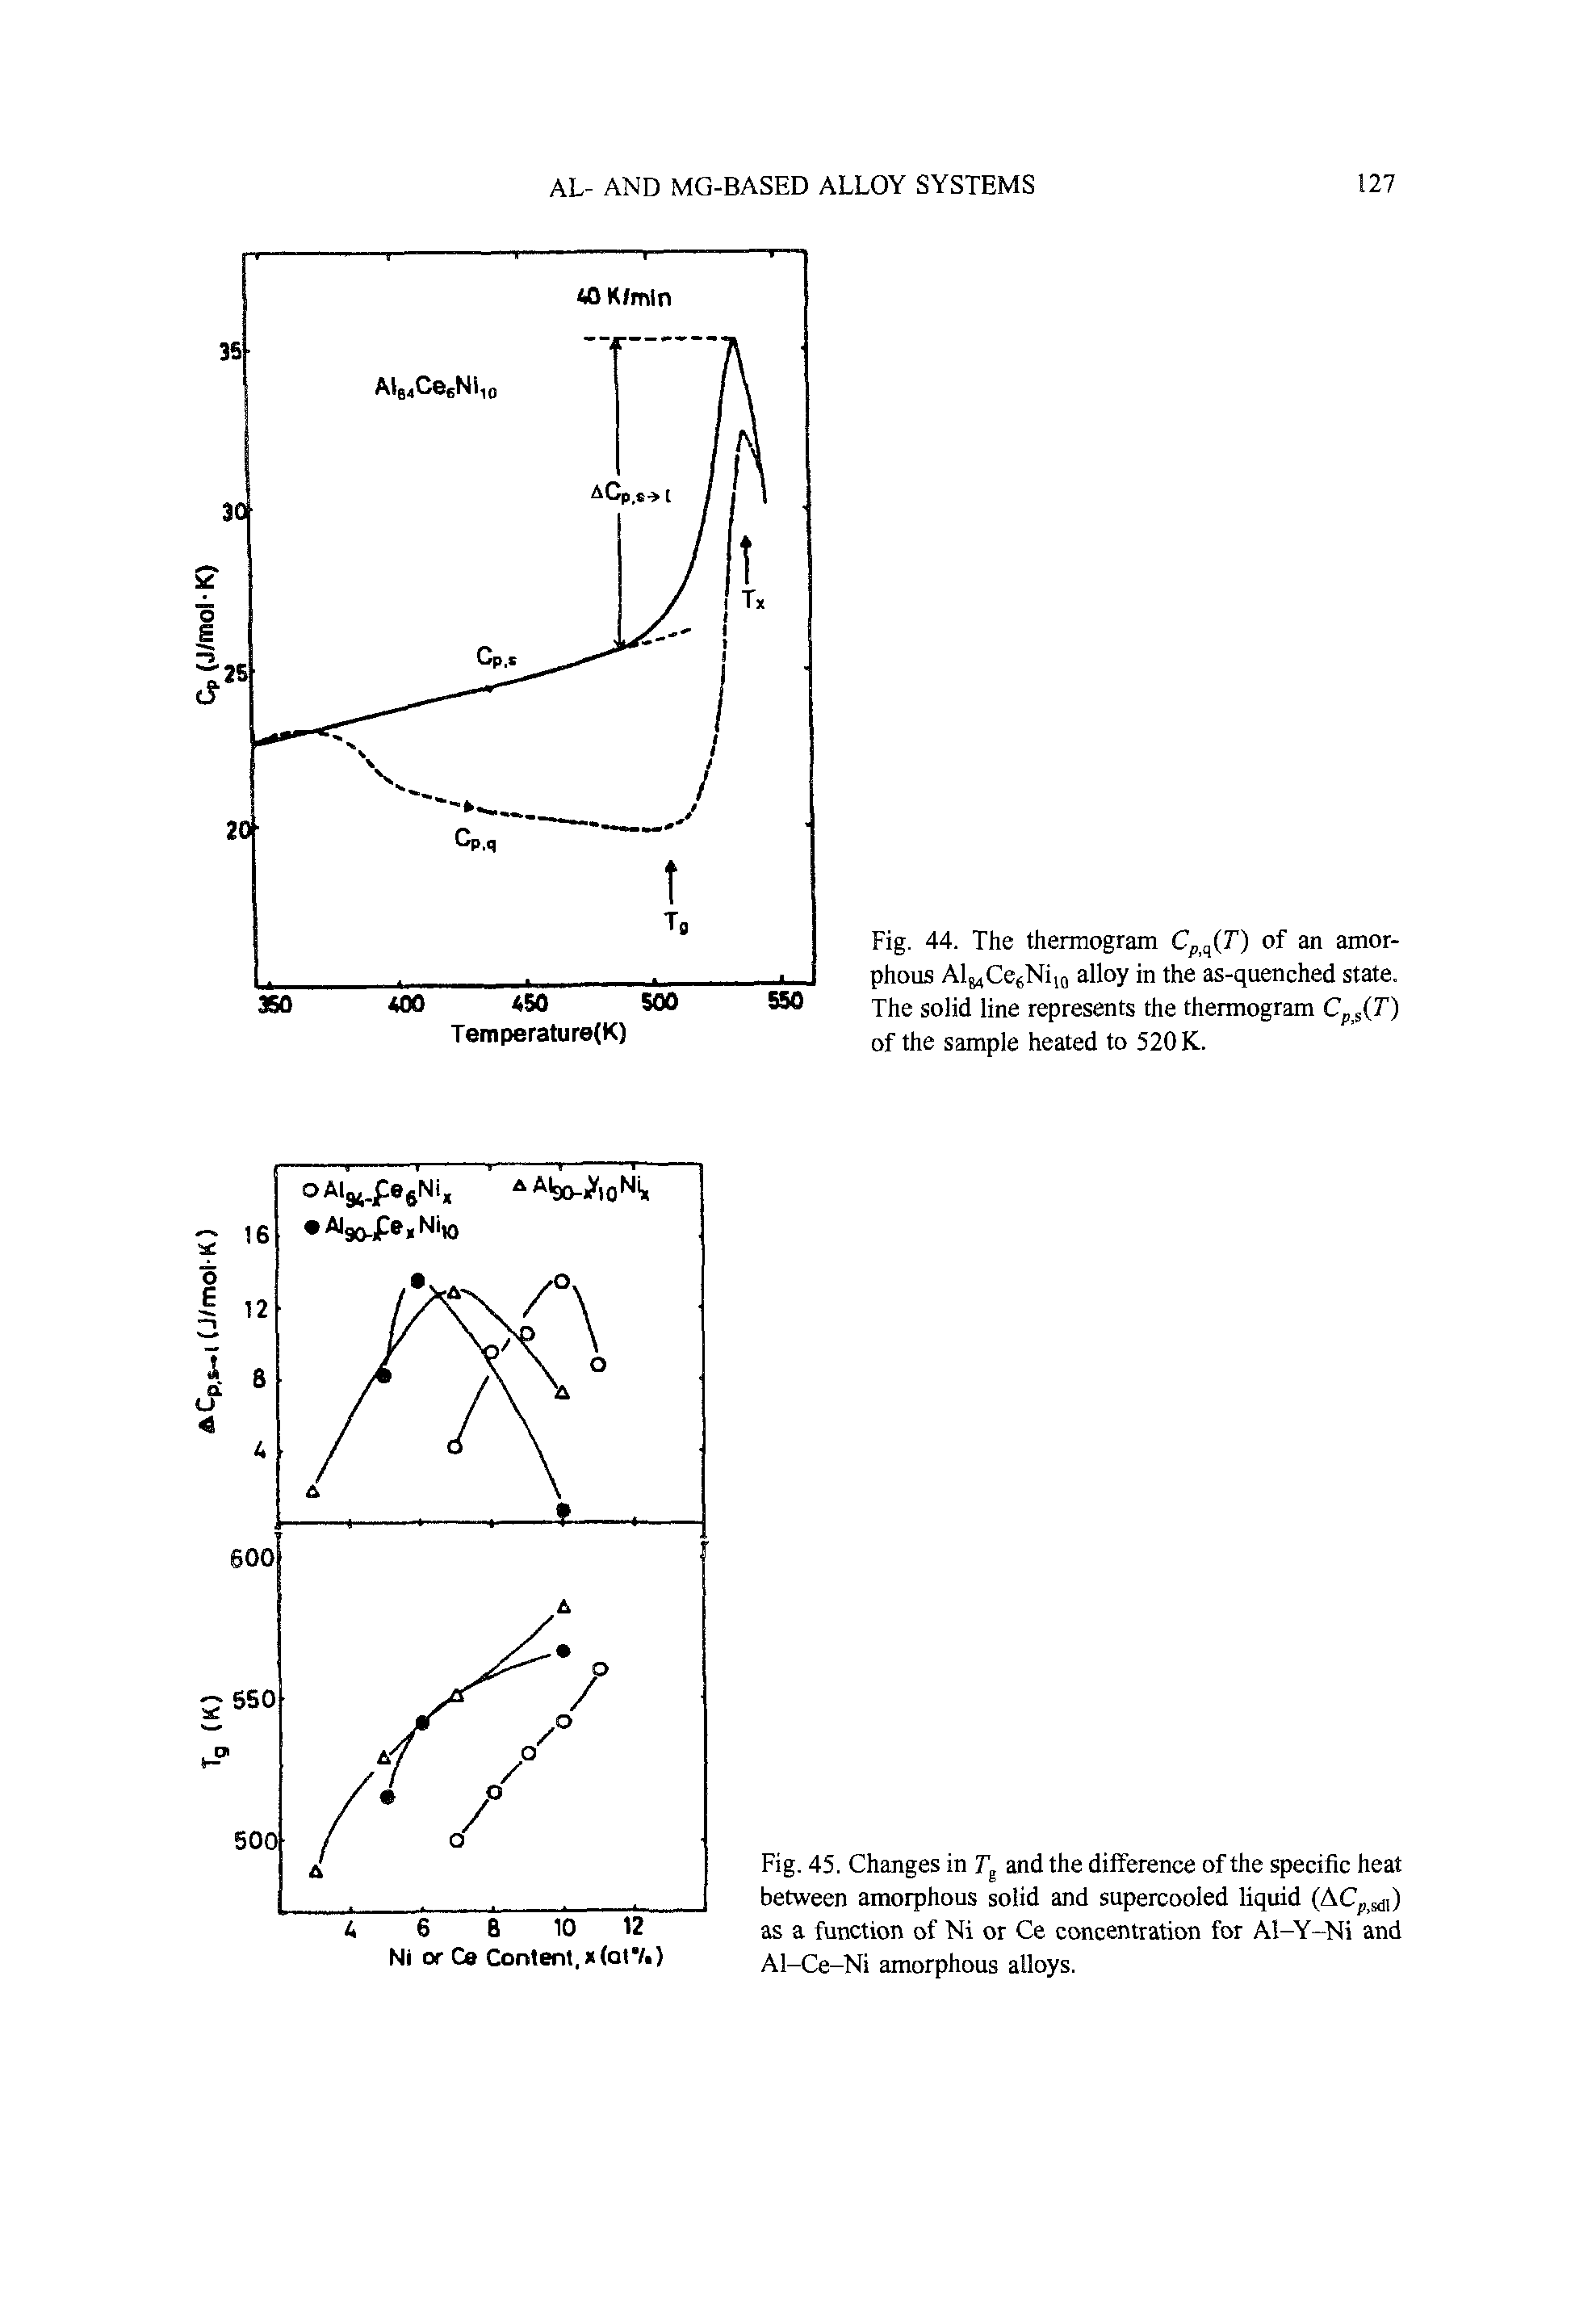 Fig. 45. Changes in and the difference of the specific heat between amorphous solid and supercooled liquid (ACp sj,) as a function of Ni or Ce concentration for Al-Y-Ni and Al-Ce-Ni amorphous alloys.